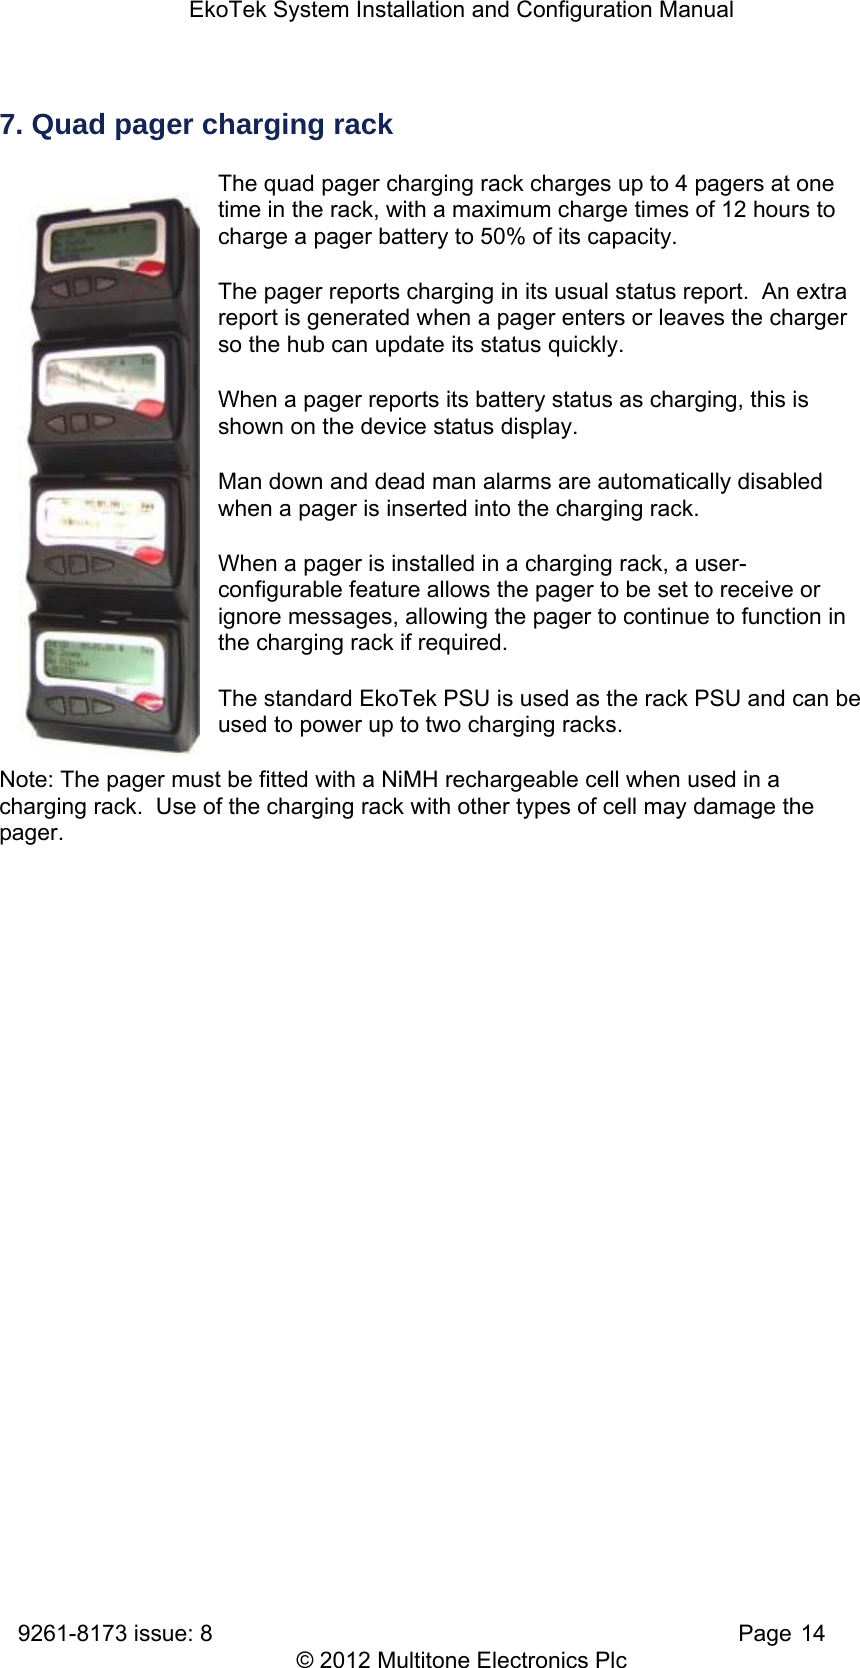 EkoTek System Installation and Configuration Manual 9261-8173 issue: 8   Page 14 © 2012 Multitone Electronics Plc 7. Quad pager charging rack The quad pager charging rack charges up to 4 pagers at one time in the rack, with a maximum charge times of 12 hours to charge a pager battery to 50% of its capacity. The pager reports charging in its usual status report.  An extra report is generated when a pager enters or leaves the charger so the hub can update its status quickly. When a pager reports its battery status as charging, this is shown on the device status display. Man down and dead man alarms are automatically disabled when a pager is inserted into the charging rack. When a pager is installed in a charging rack, a user-configurable feature allows the pager to be set to receive or ignore messages, allowing the pager to continue to function in the charging rack if required. The standard EkoTek PSU is used as the rack PSU and can be used to power up to two charging racks. Note: The pager must be fitted with a NiMH rechargeable cell when used in a charging rack.  Use of the charging rack with other types of cell may damage the pager. 